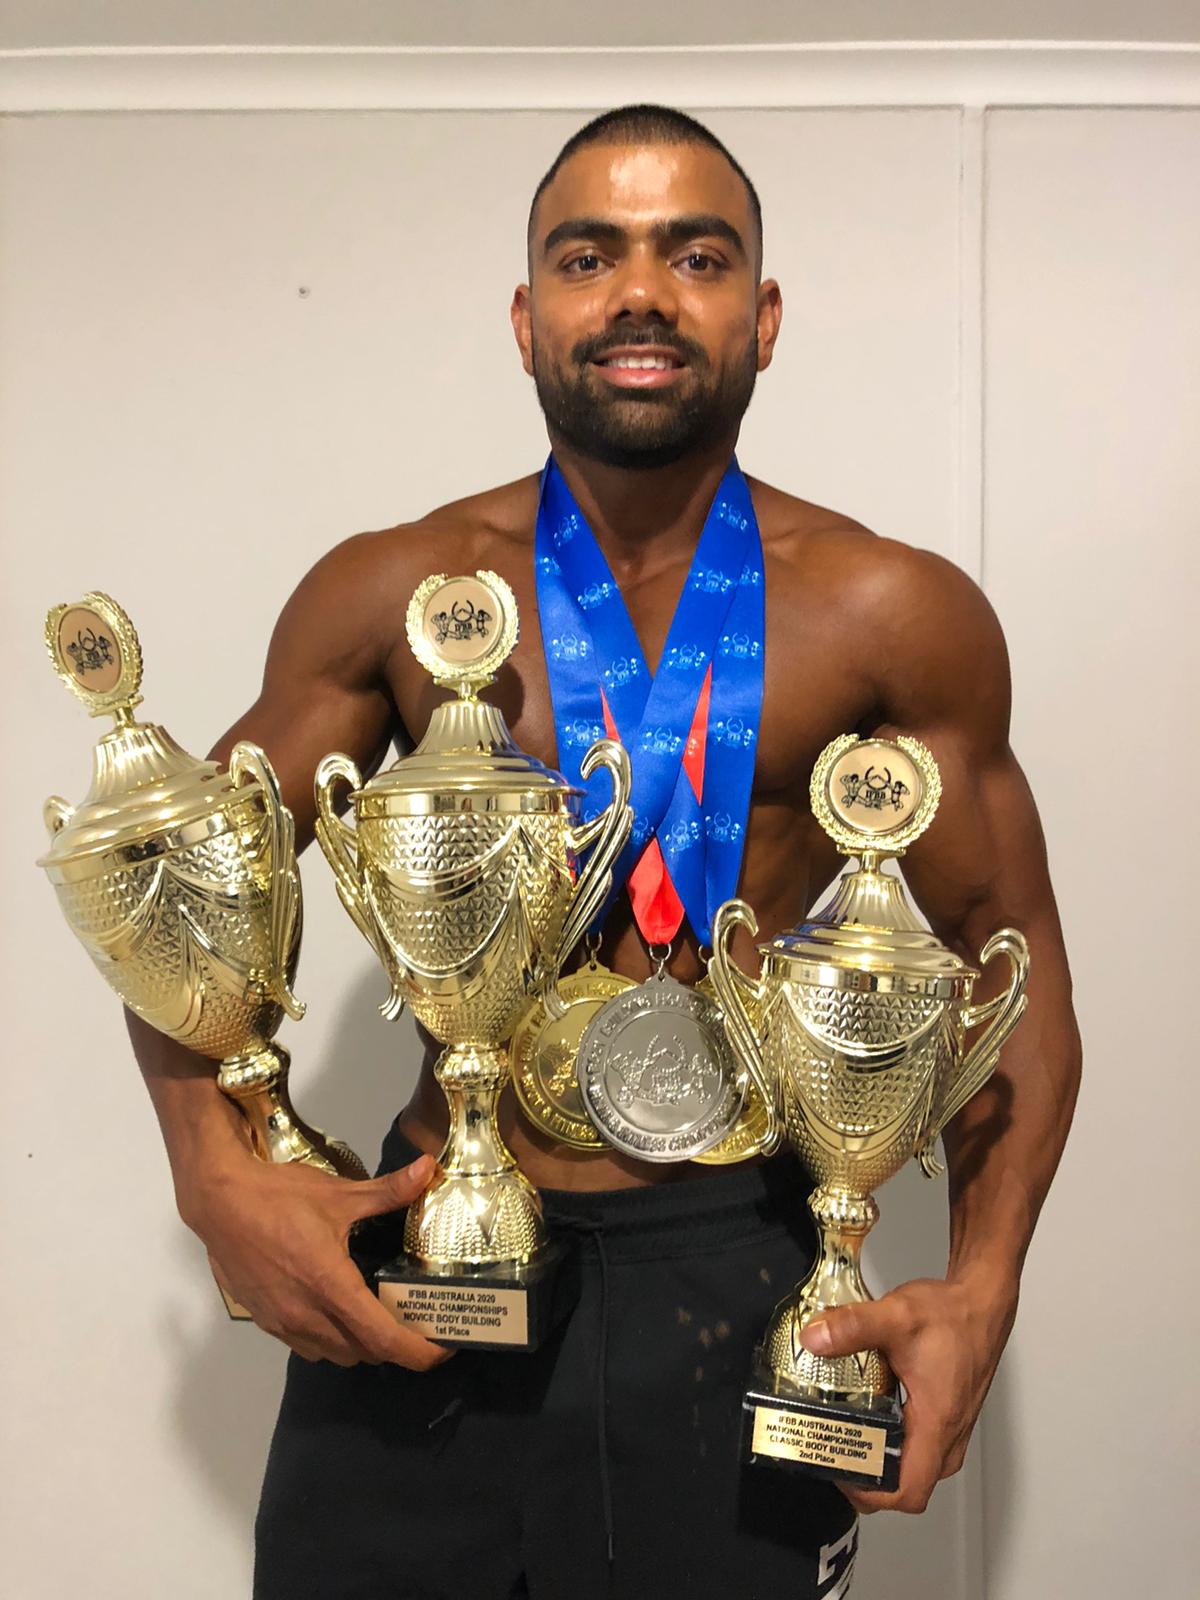 Professional Online Fitness Trainer Hasnain Vali Karimi To Enter For The 2022 Oceana Championship